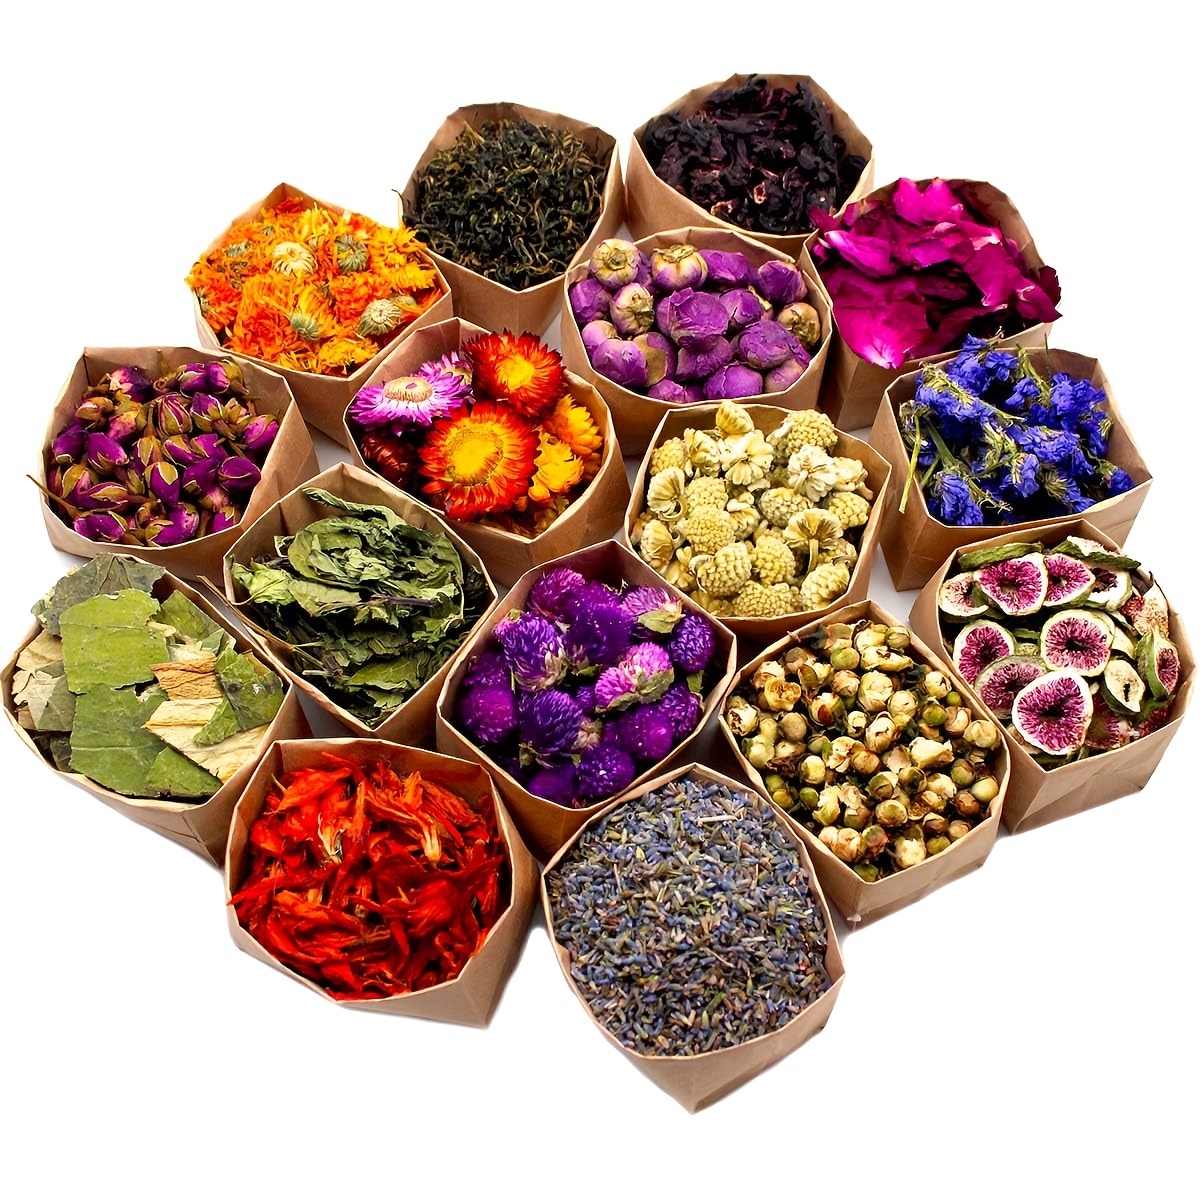 [Latest] 21 Pack Dried Flowers for Candle Making, 100% Natural Dried Herbs  Kit for Soap Making, Bath, Resin Jewelry Making, Bulk Dried Flowers Include